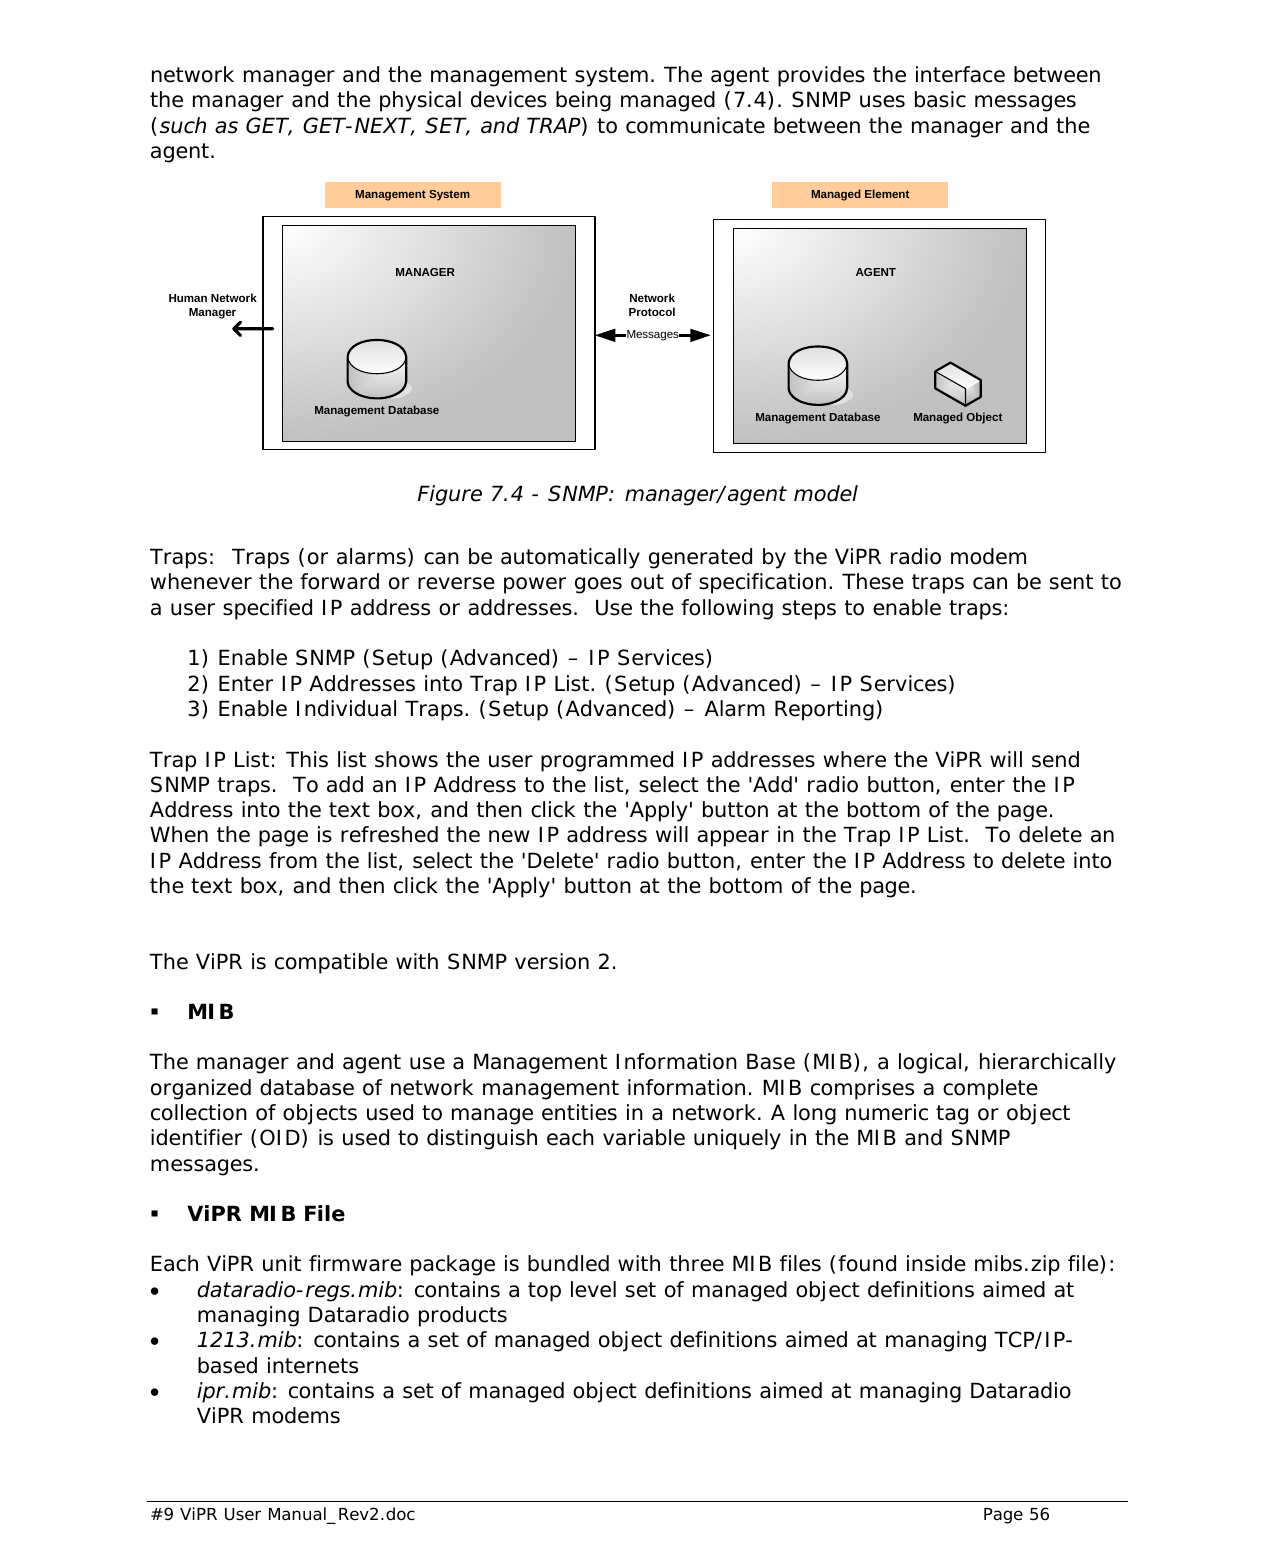  #9 ViPR User Manual_Rev2.doc    Page 56  network manager and the management system. The agent provides the interface between the manager and the physical devices being managed (7.4). SNMP uses basic messages (such as GET, GET-NEXT, SET, and TRAP) to communicate between the manager and the agent.  MANAGER AGENTManagement Database Management Database Managed ObjectMessagesNetwork ProtocolManagement System Managed ElementHuman Network Manager Figure 7.4 - SNMP: manager/agent model   Traps:  Traps (or alarms) can be automatically generated by the ViPR radio modem whenever the forward or reverse power goes out of specification. These traps can be sent to a user specified IP address or addresses.  Use the following steps to enable traps:  1) Enable SNMP (Setup (Advanced) – IP Services) 2) Enter IP Addresses into Trap IP List. (Setup (Advanced) – IP Services) 3) Enable Individual Traps. (Setup (Advanced) – Alarm Reporting)  Trap IP List: This list shows the user programmed IP addresses where the ViPR will send SNMP traps.  To add an IP Address to the list, select the &apos;Add&apos; radio button, enter the IP Address into the text box, and then click the &apos;Apply&apos; button at the bottom of the page.  When the page is refreshed the new IP address will appear in the Trap IP List.  To delete an IP Address from the list, select the &apos;Delete&apos; radio button, enter the IP Address to delete into the text box, and then click the &apos;Apply&apos; button at the bottom of the page.  The ViPR is compatible with SNMP version 2.  MIB  The manager and agent use a Management Information Base (MIB), a logical, hierarchically organized database of network management information. MIB comprises a complete collection of objects used to manage entities in a network. A long numeric tag or object identifier (OID) is used to distinguish each variable uniquely in the MIB and SNMP messages.  ViPR MIB File Each ViPR unit firmware package is bundled with three MIB files (found inside mibs.zip file): • dataradio-regs.mib: contains a top level set of managed object definitions aimed at managing Dataradio products • 1213.mib: contains a set of managed object definitions aimed at managing TCP/IP-based internets • ipr.mib: contains a set of managed object definitions aimed at managing Dataradio ViPR modems  